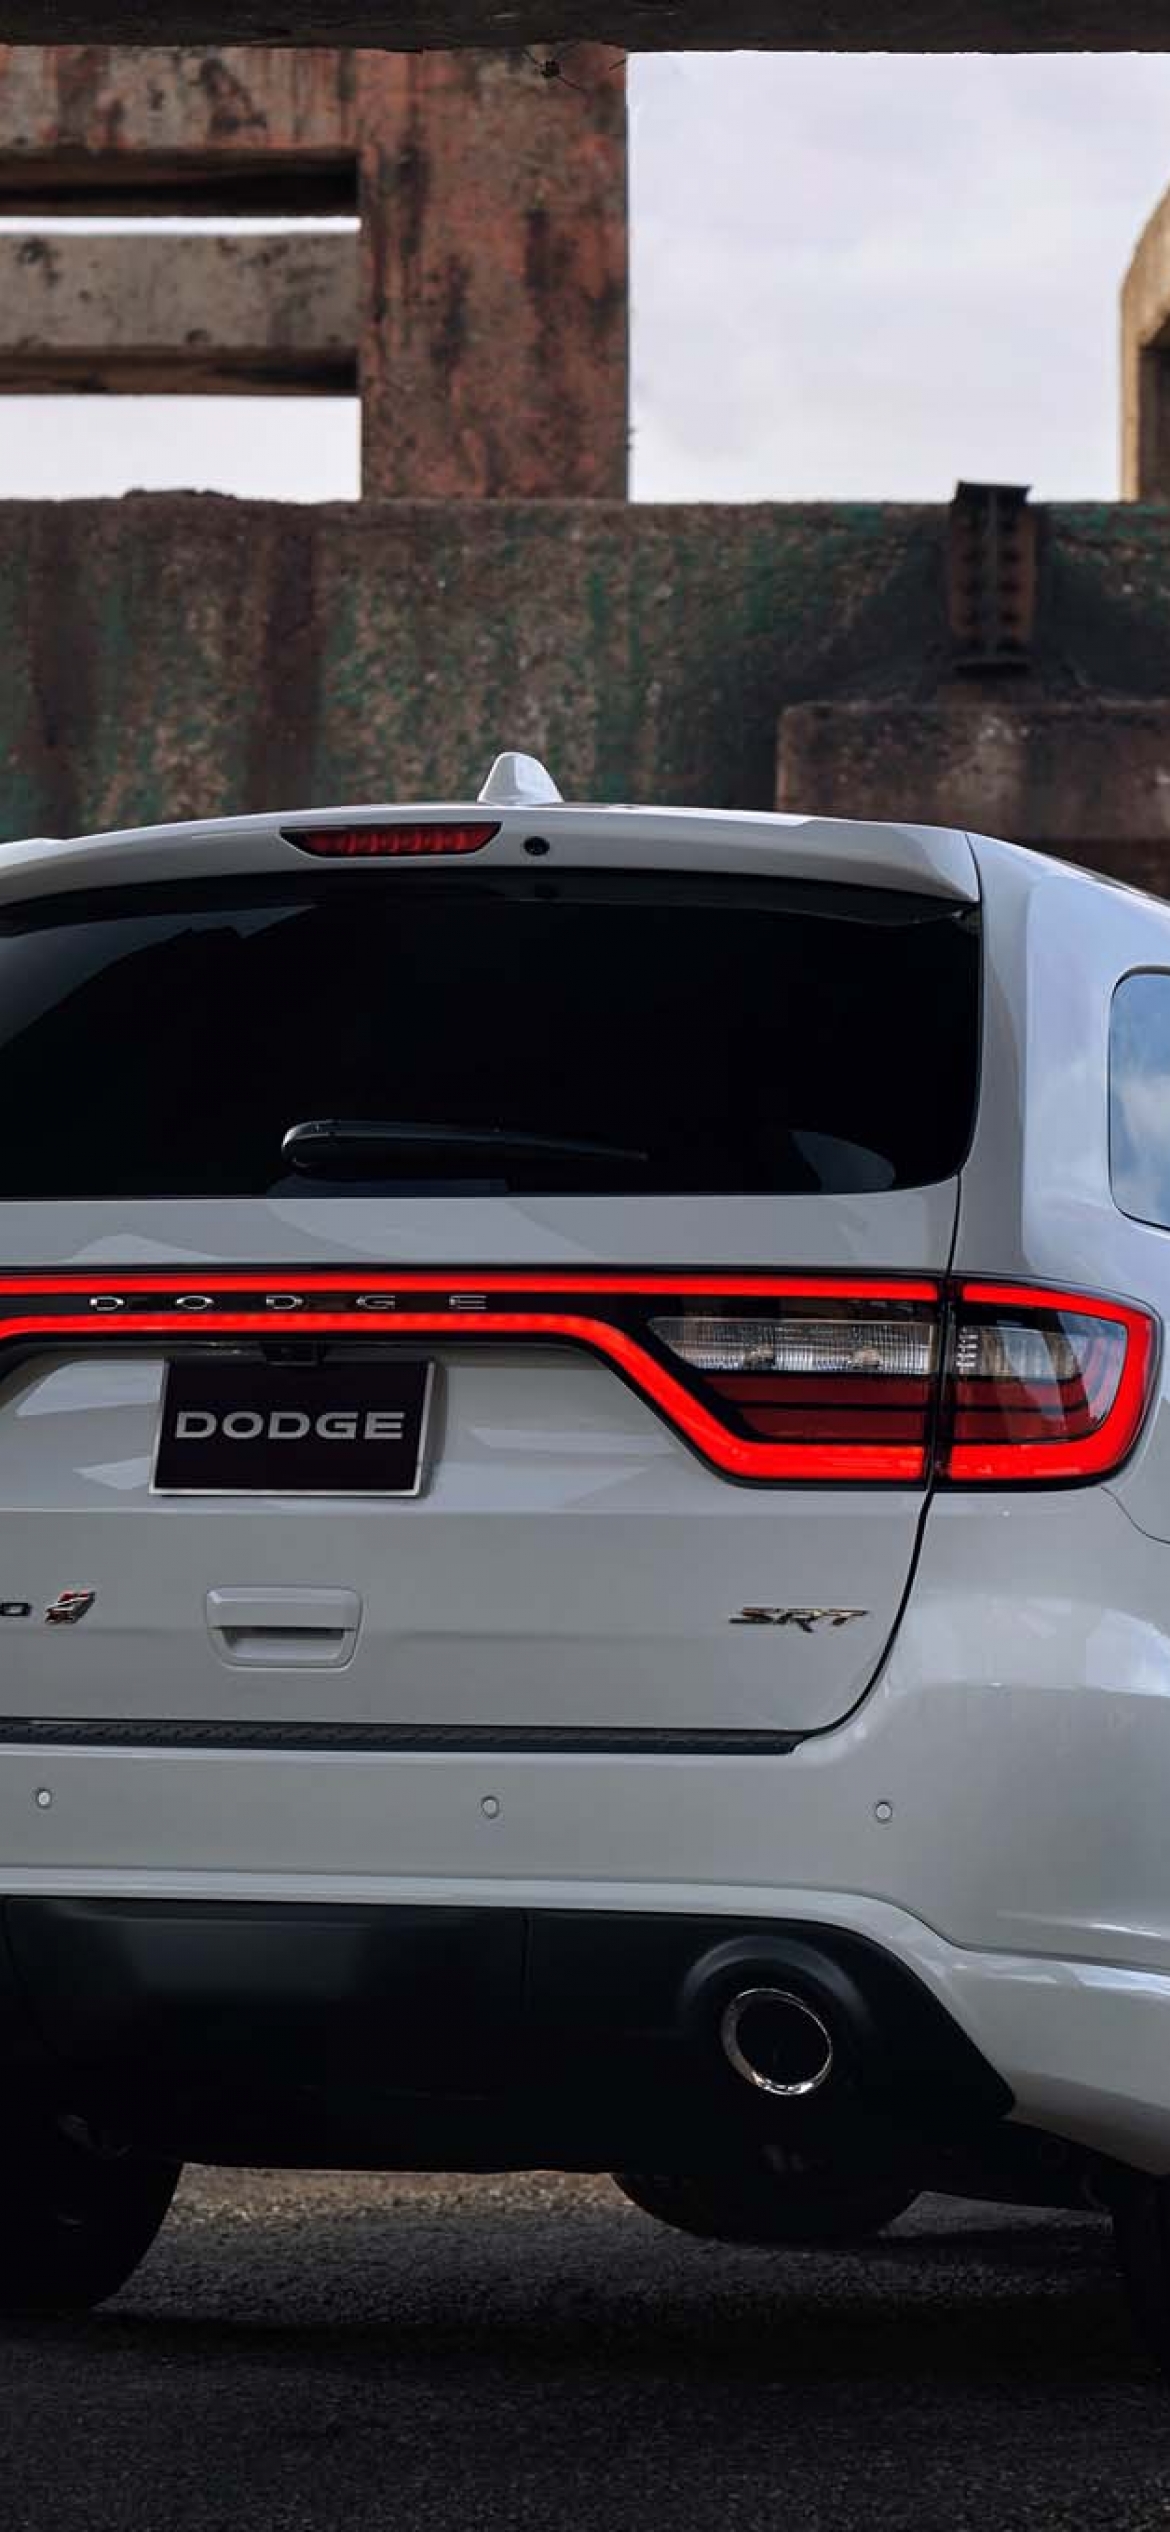 Download Dodge Durango wallpapers for mobile phone free Dodge Durango  HD pictures